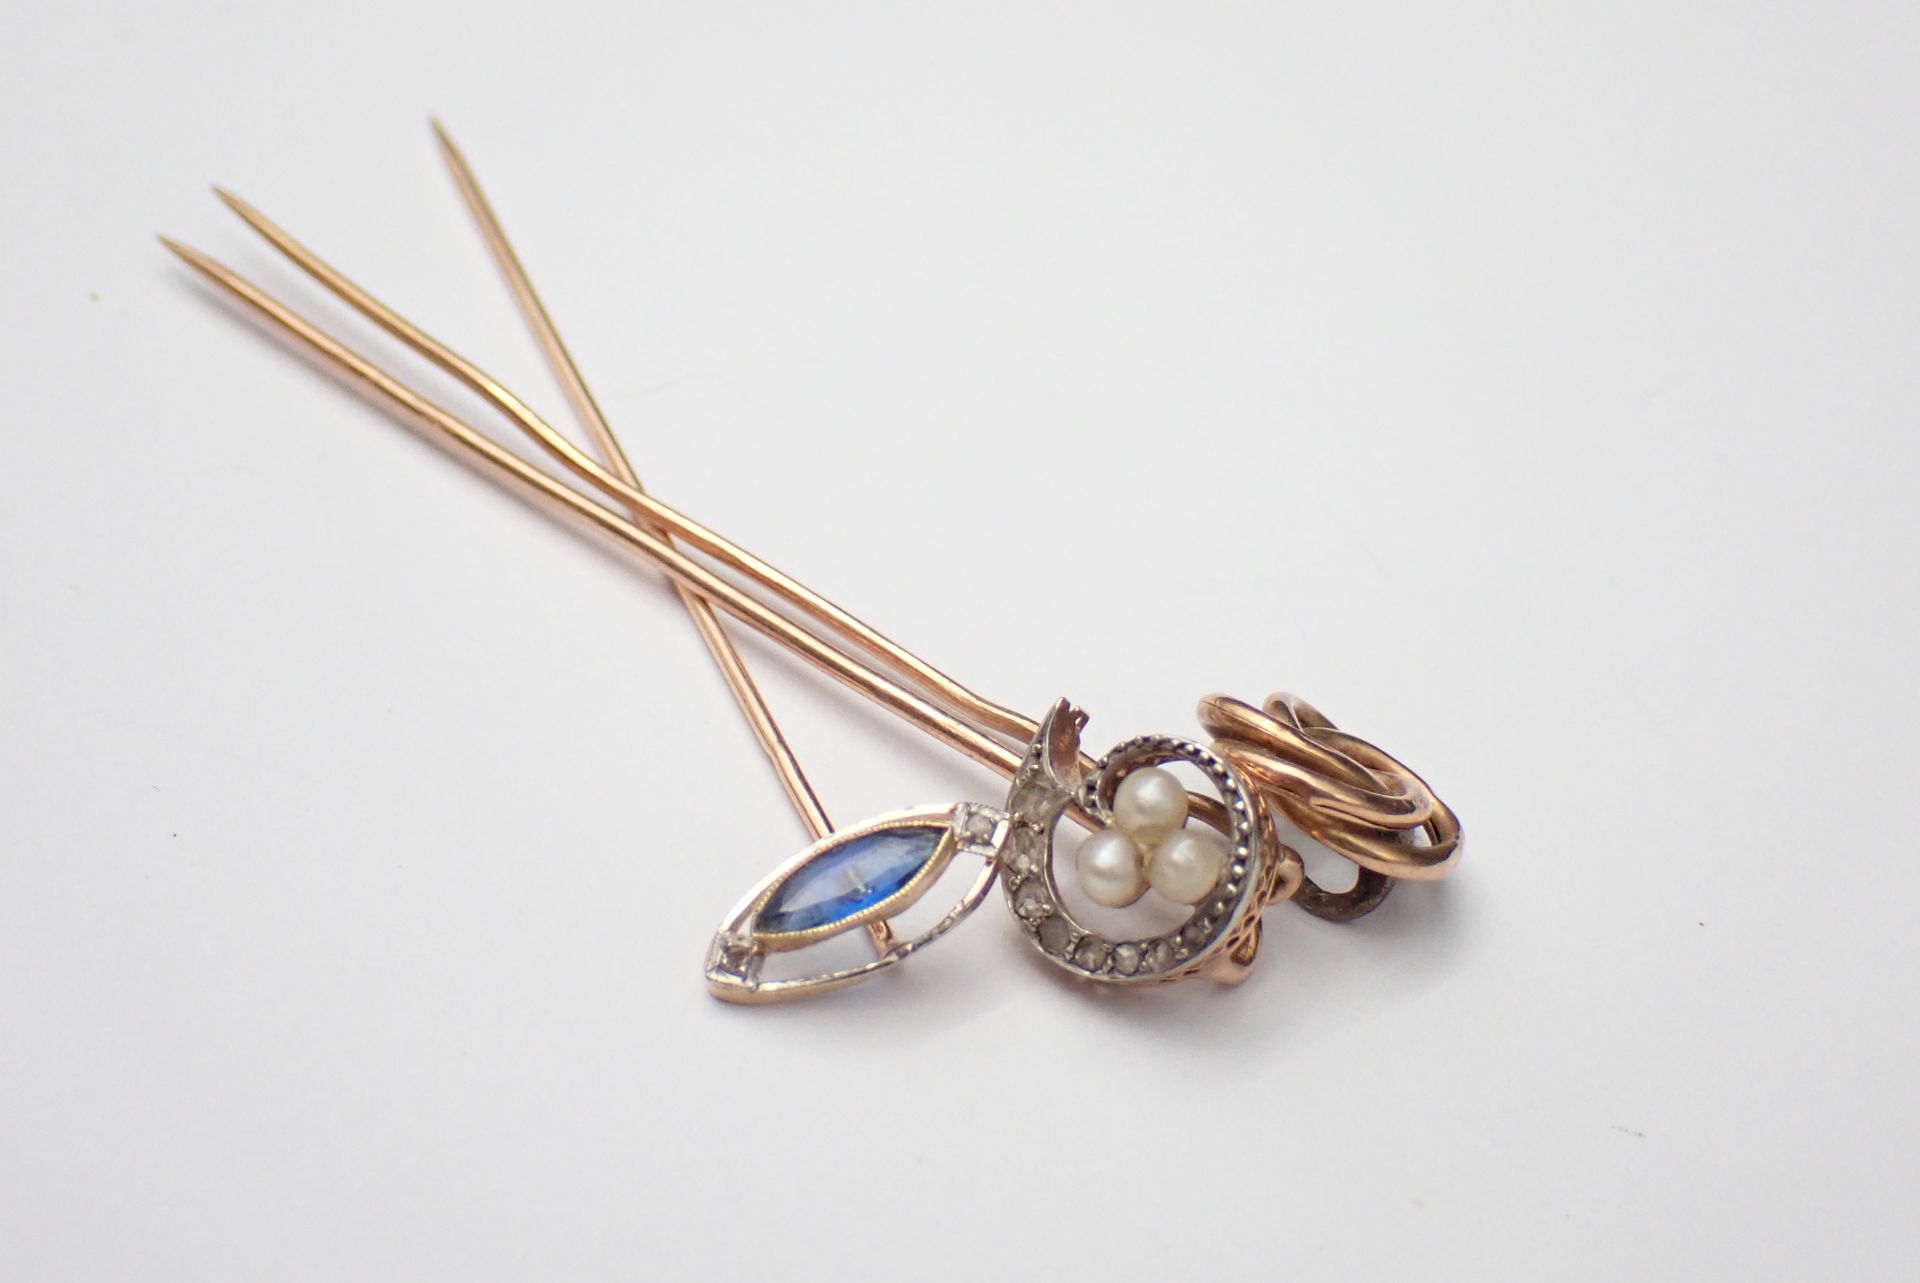 Null 3 tie pins in gold, pearls and stones, weight 4.2g such